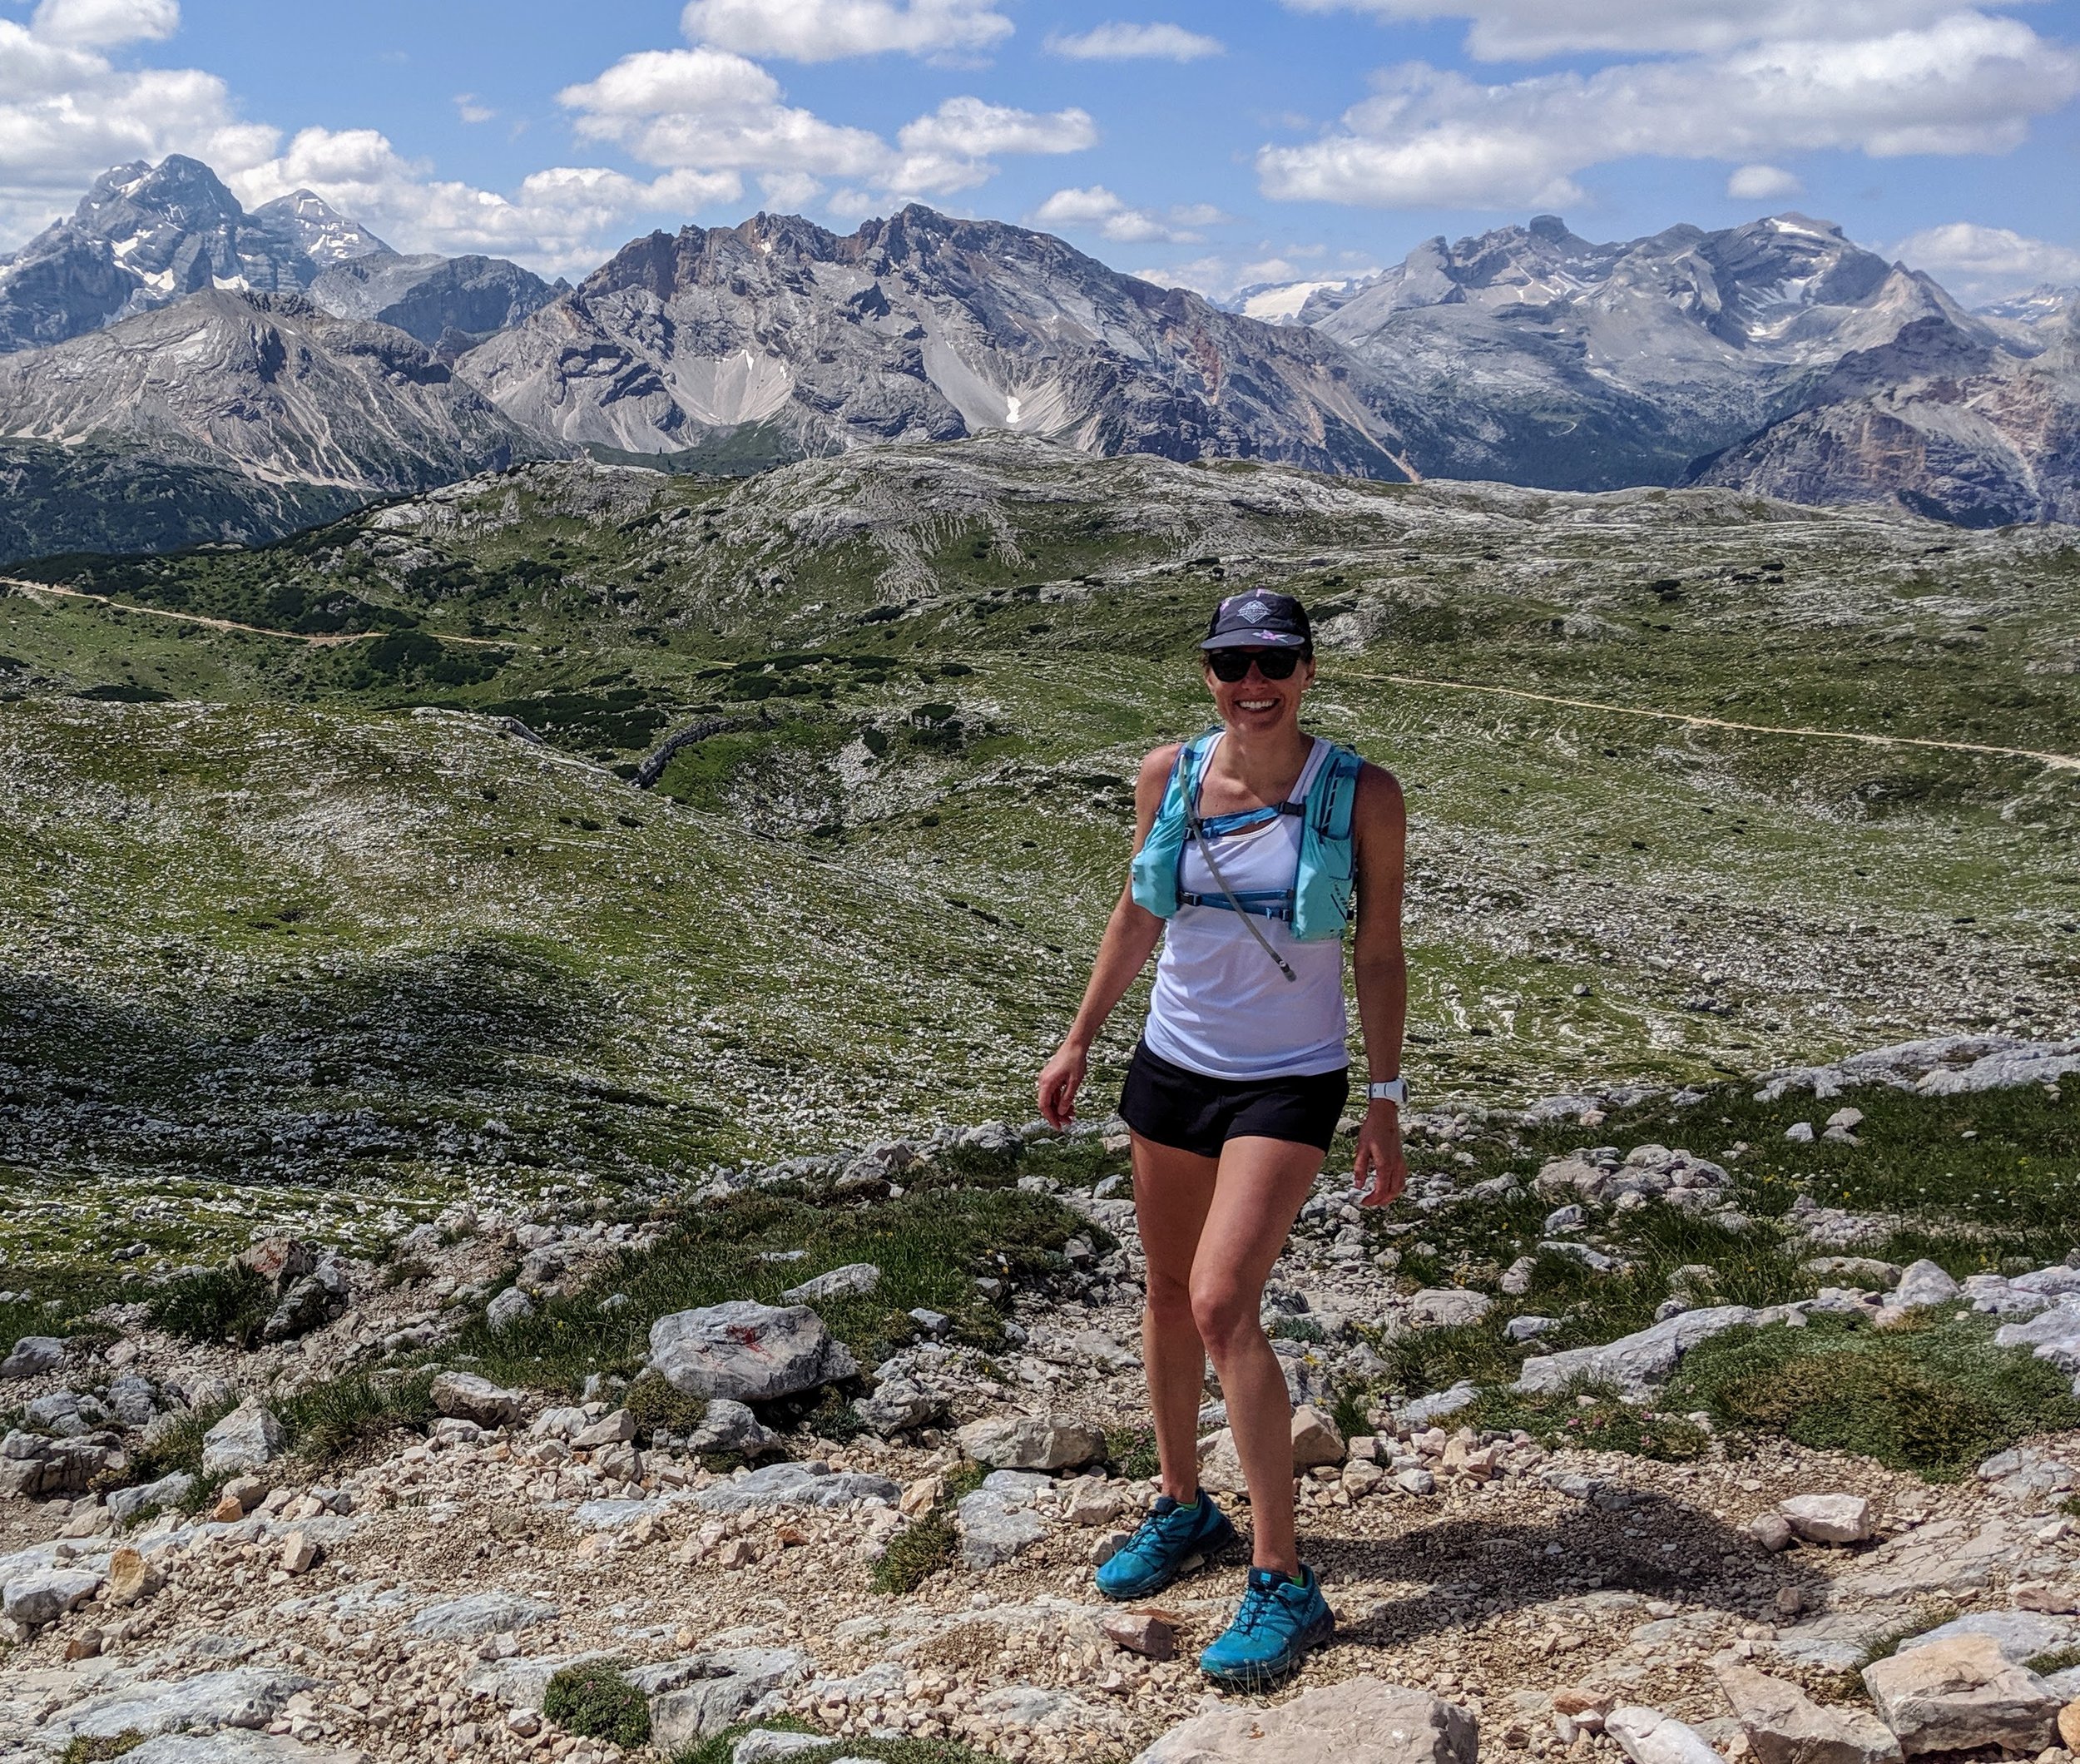   Name:  Shelby   Hometown:  Boulder, CO, USA   Which Runcation did you attend:  Dolomites Hut to Hut   What is your profession:  Human Resources, Mergers &amp; Acquisitions   How long have you been running?:  22 years.   Did you have experience runn